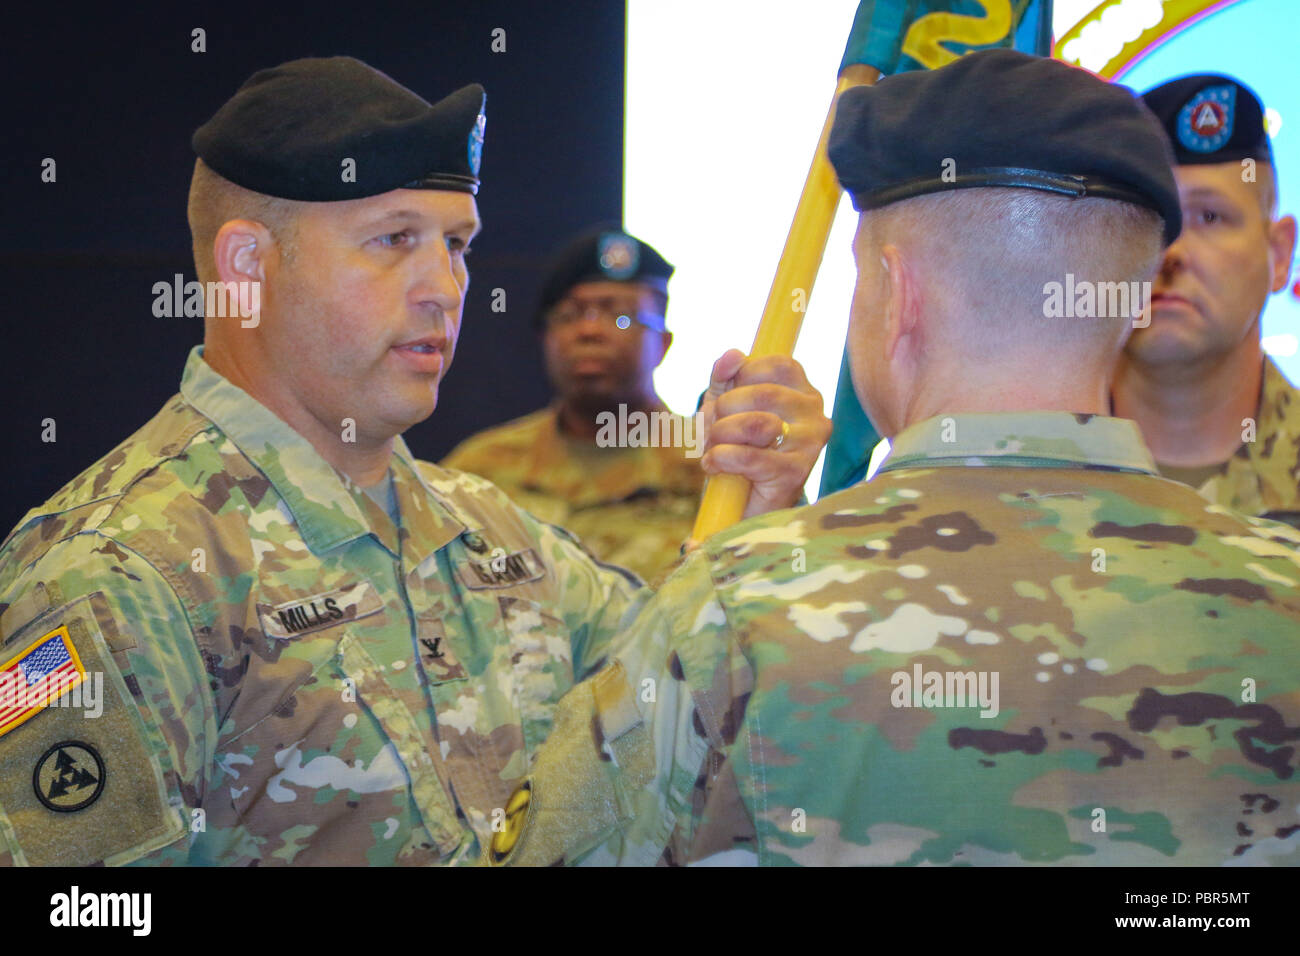 Col. Douglas W. Mills, incoming commander of the 2503rd Digital Liaison Detachment, receives the unit colors from Maj. Gen. David C. Hill, deputy commanding general, U.S. Army Central, during a change-of-command ceremony July 19, 2018, at Patton Hall on Shaw Air Force Base, S.C. (U.S. Army photo by Sgt. Von Marie Donato) Stock Photo